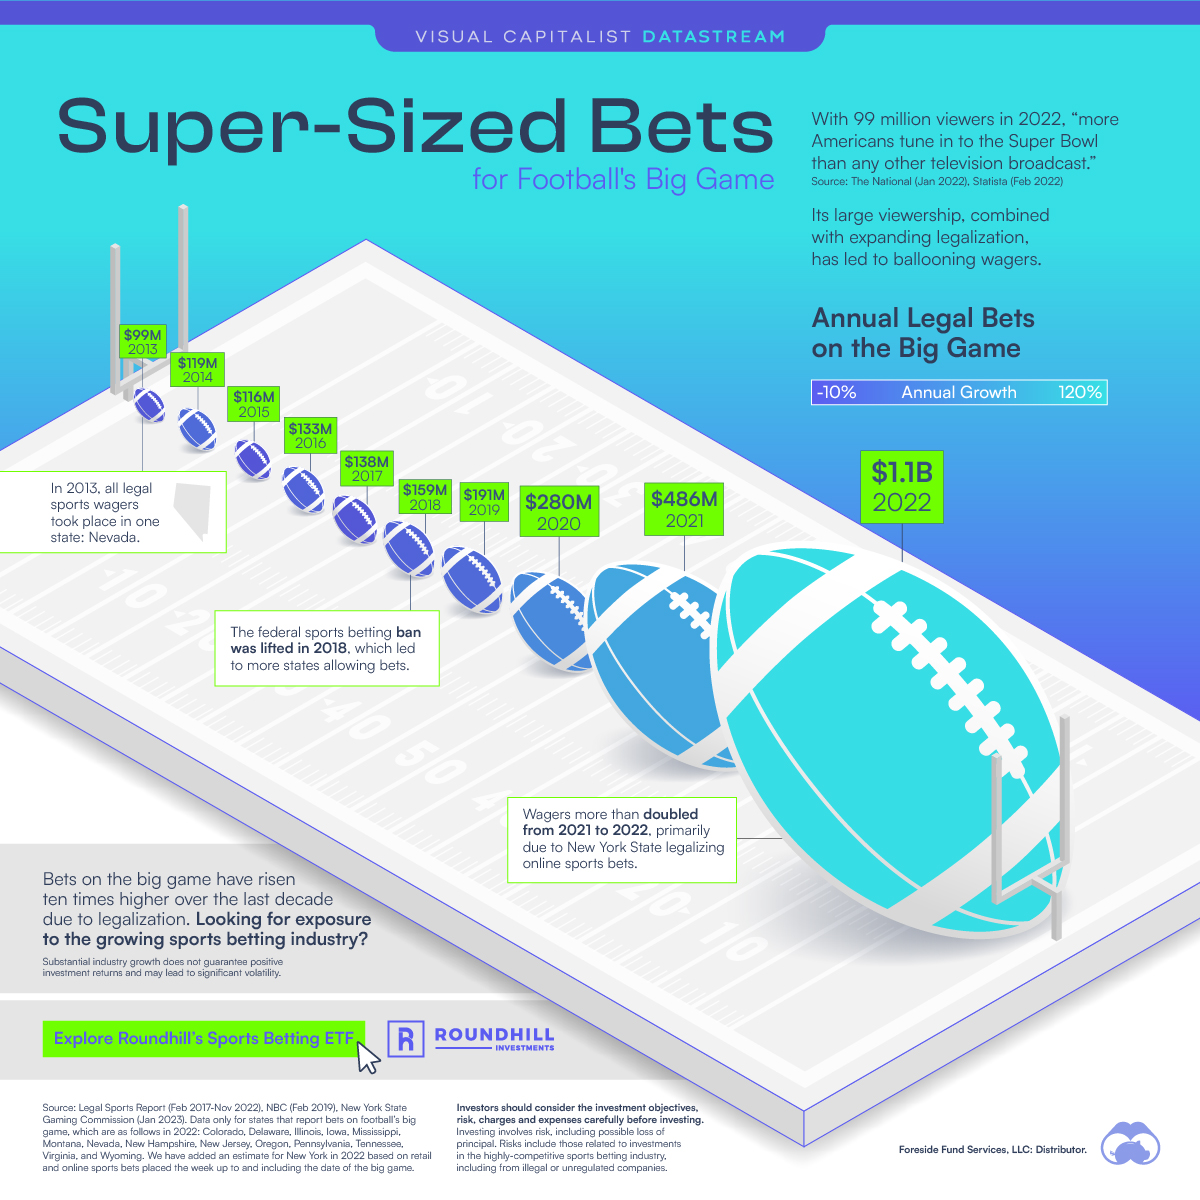 Football's Big Game: Charting Super-Sized Bets (2013-2022)